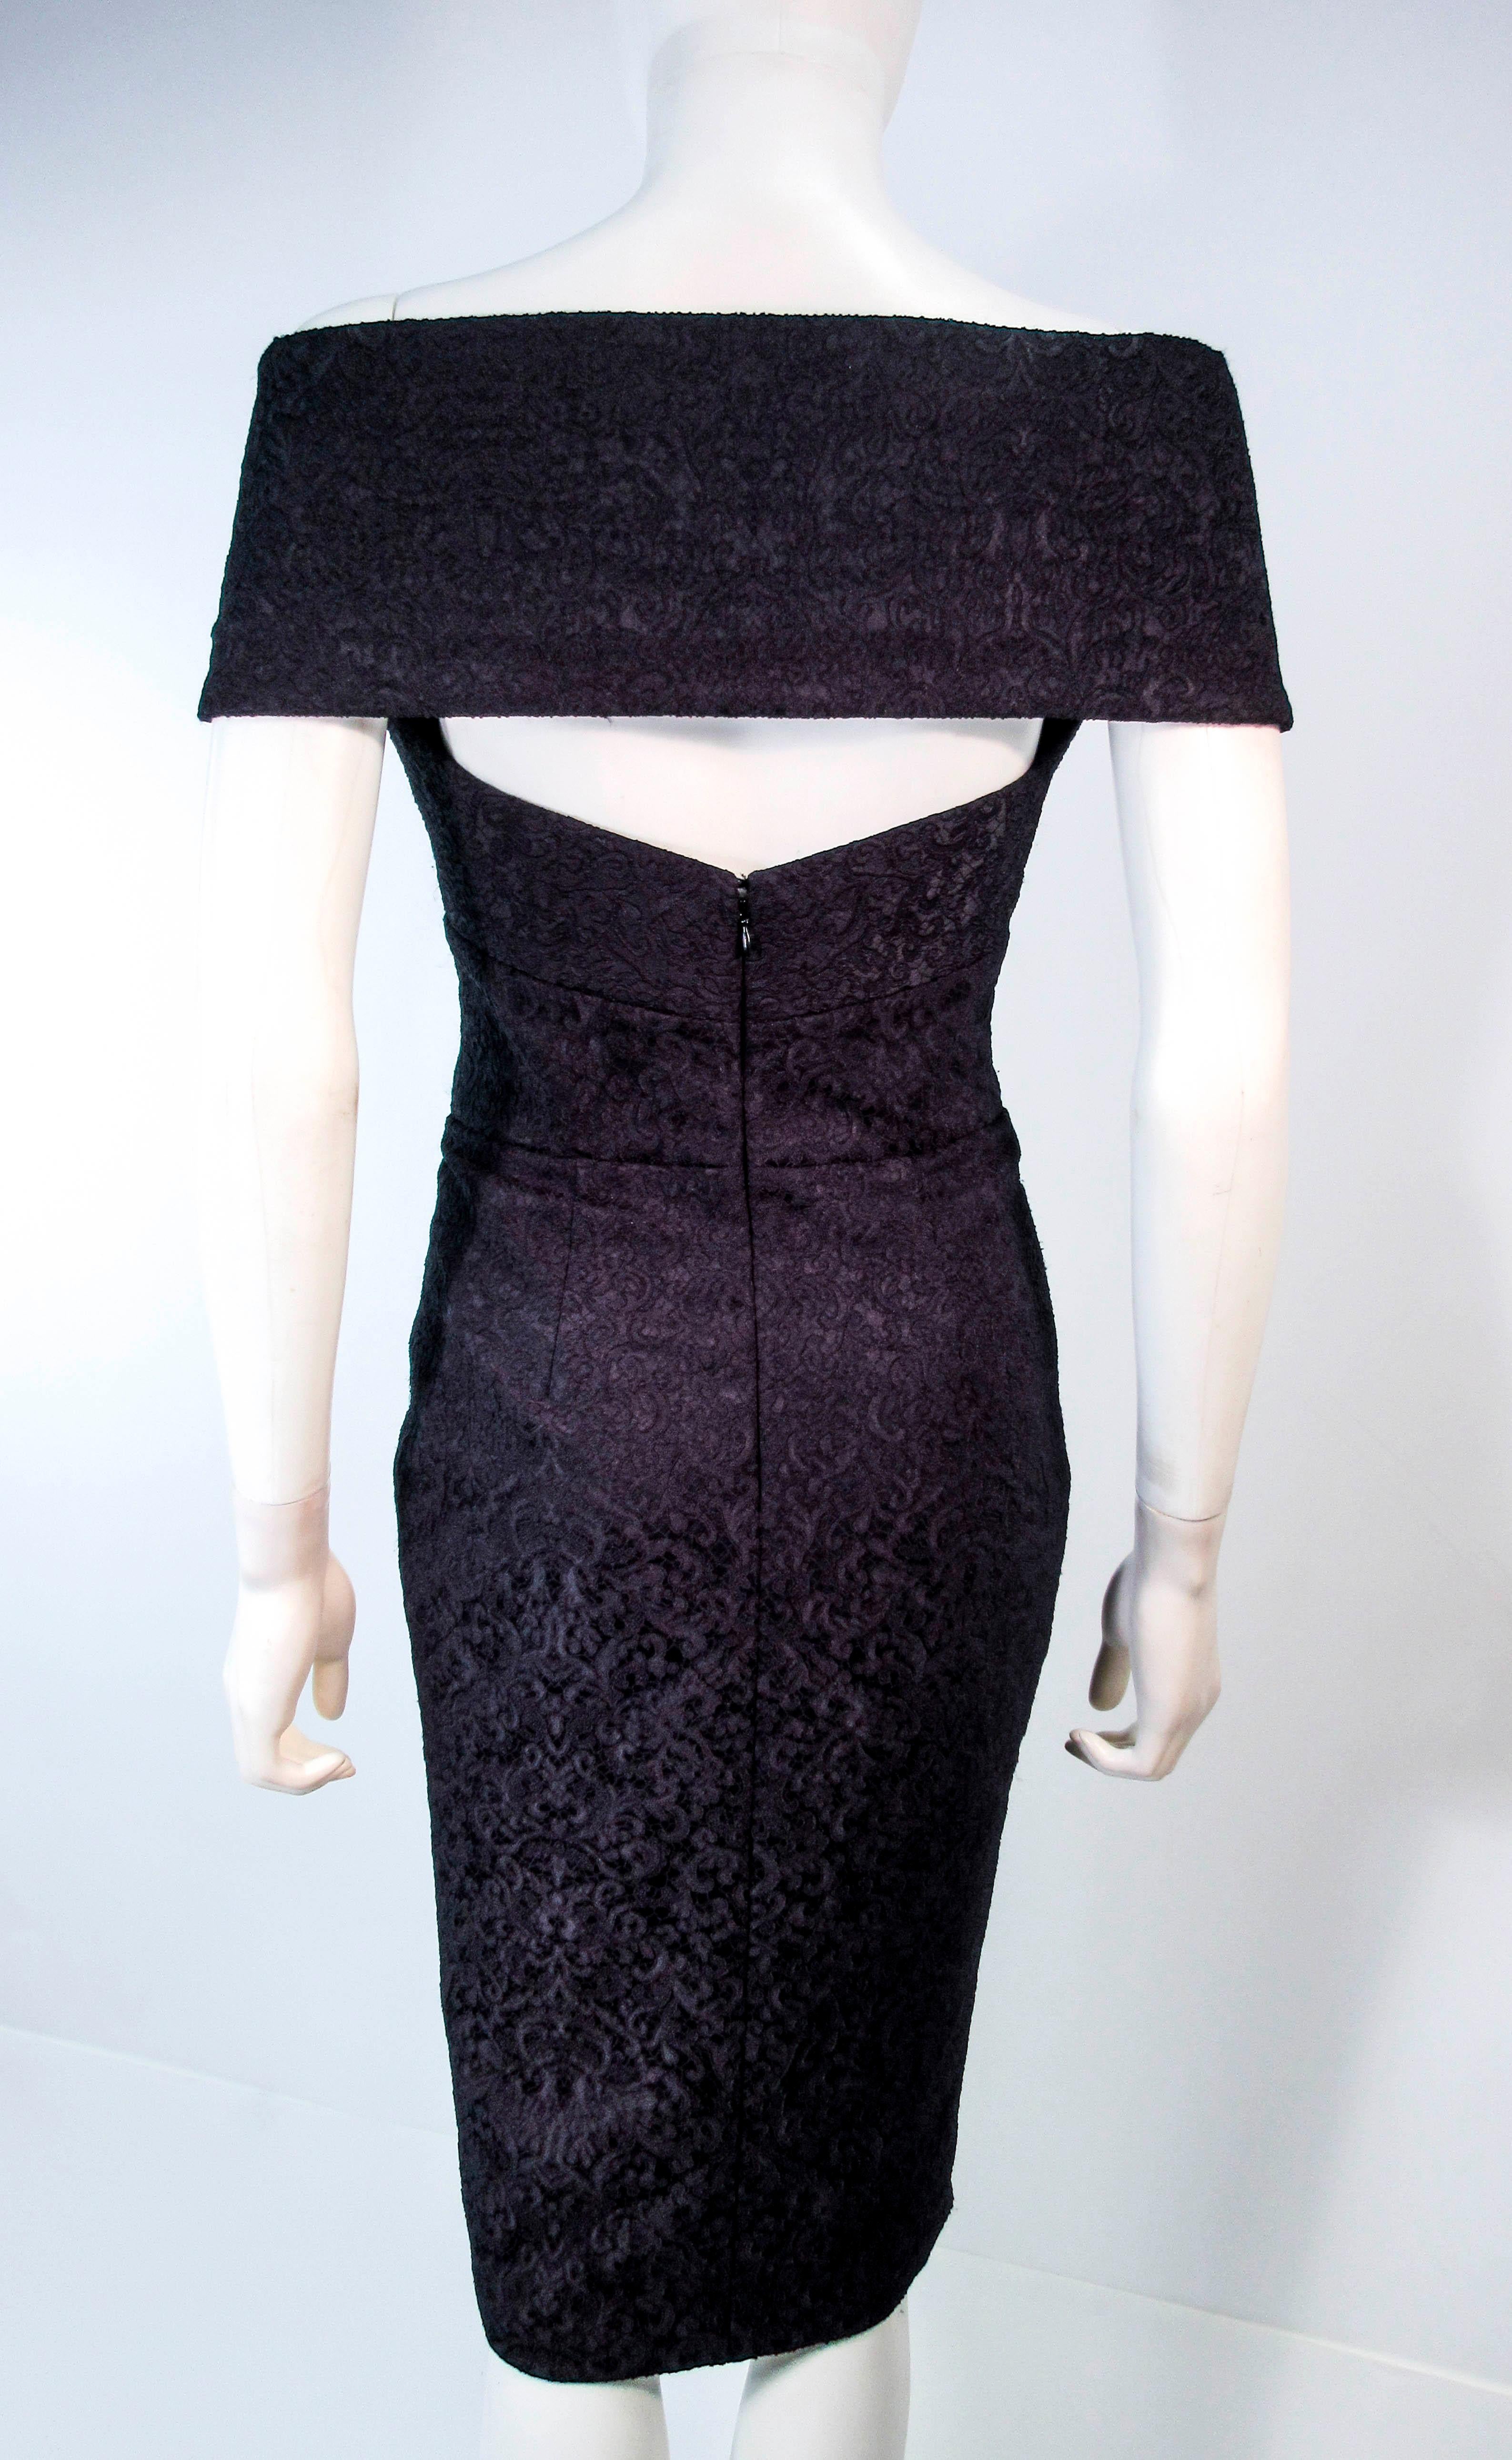 ELIZABETH MASON COUTURE 'MARIA' Black Stretch Lace Cocktail Dress Made to Order For Sale 7